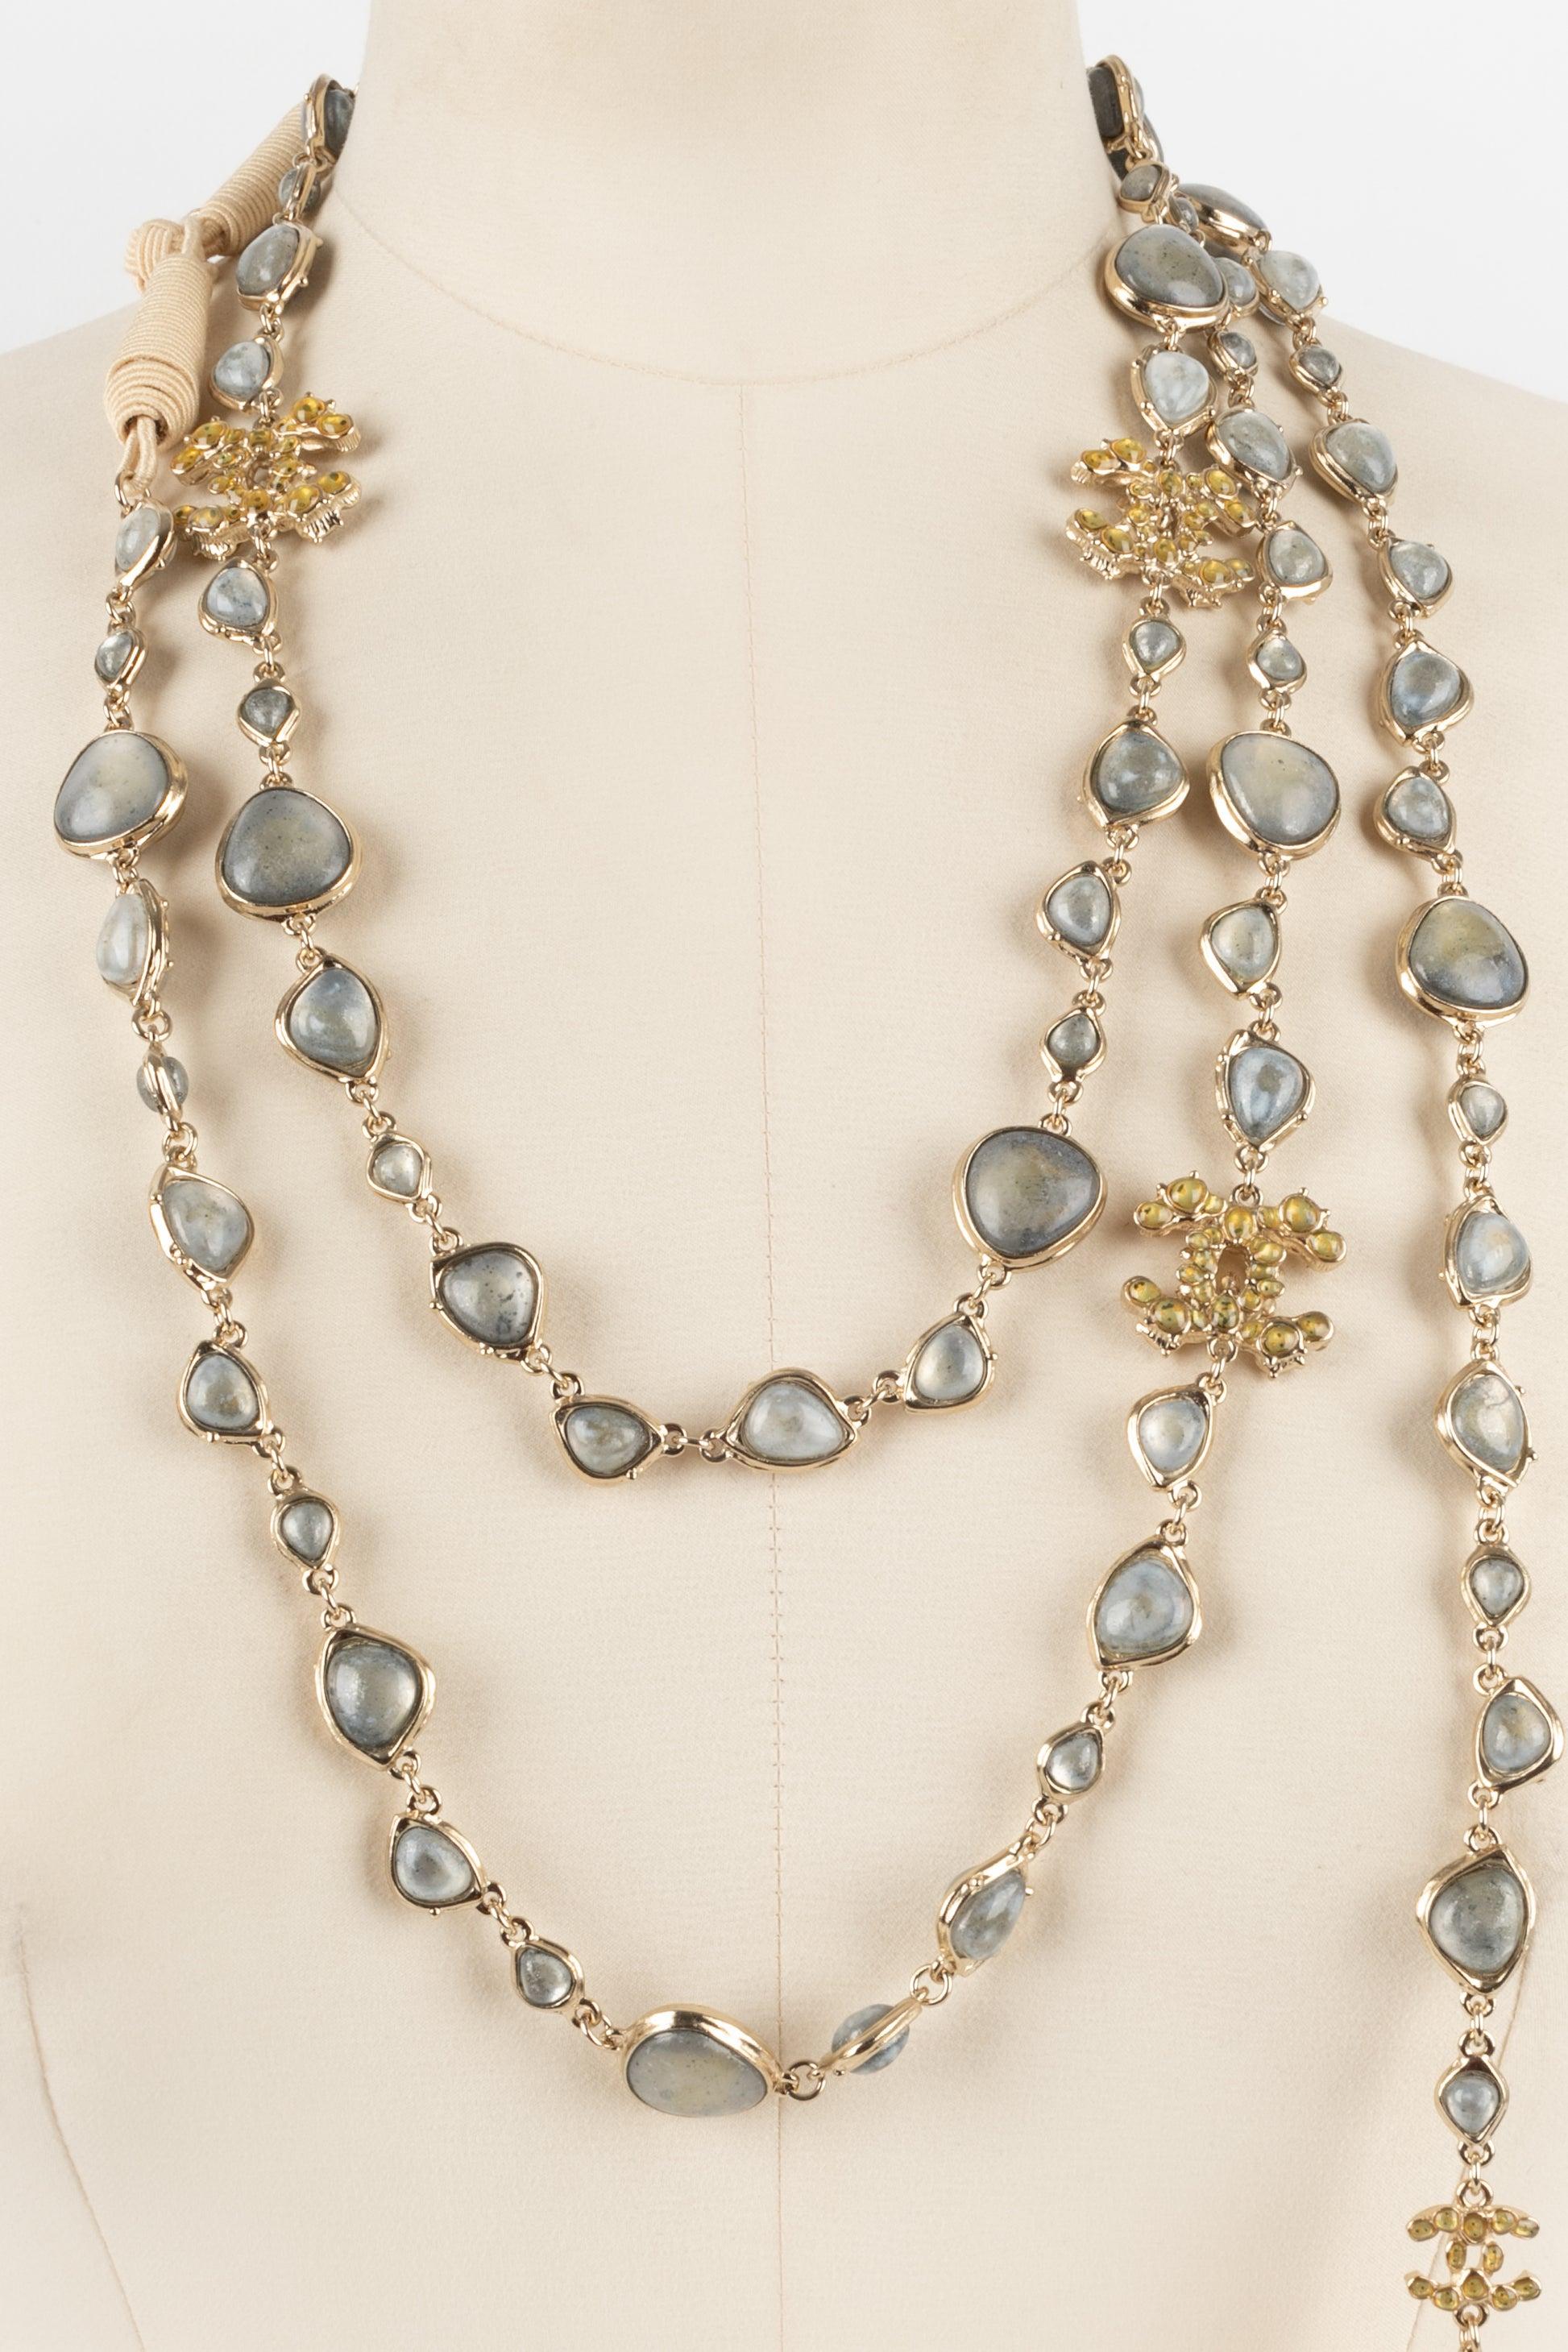 Women's Chanel Champagne Metal Tie Necklace, 2012